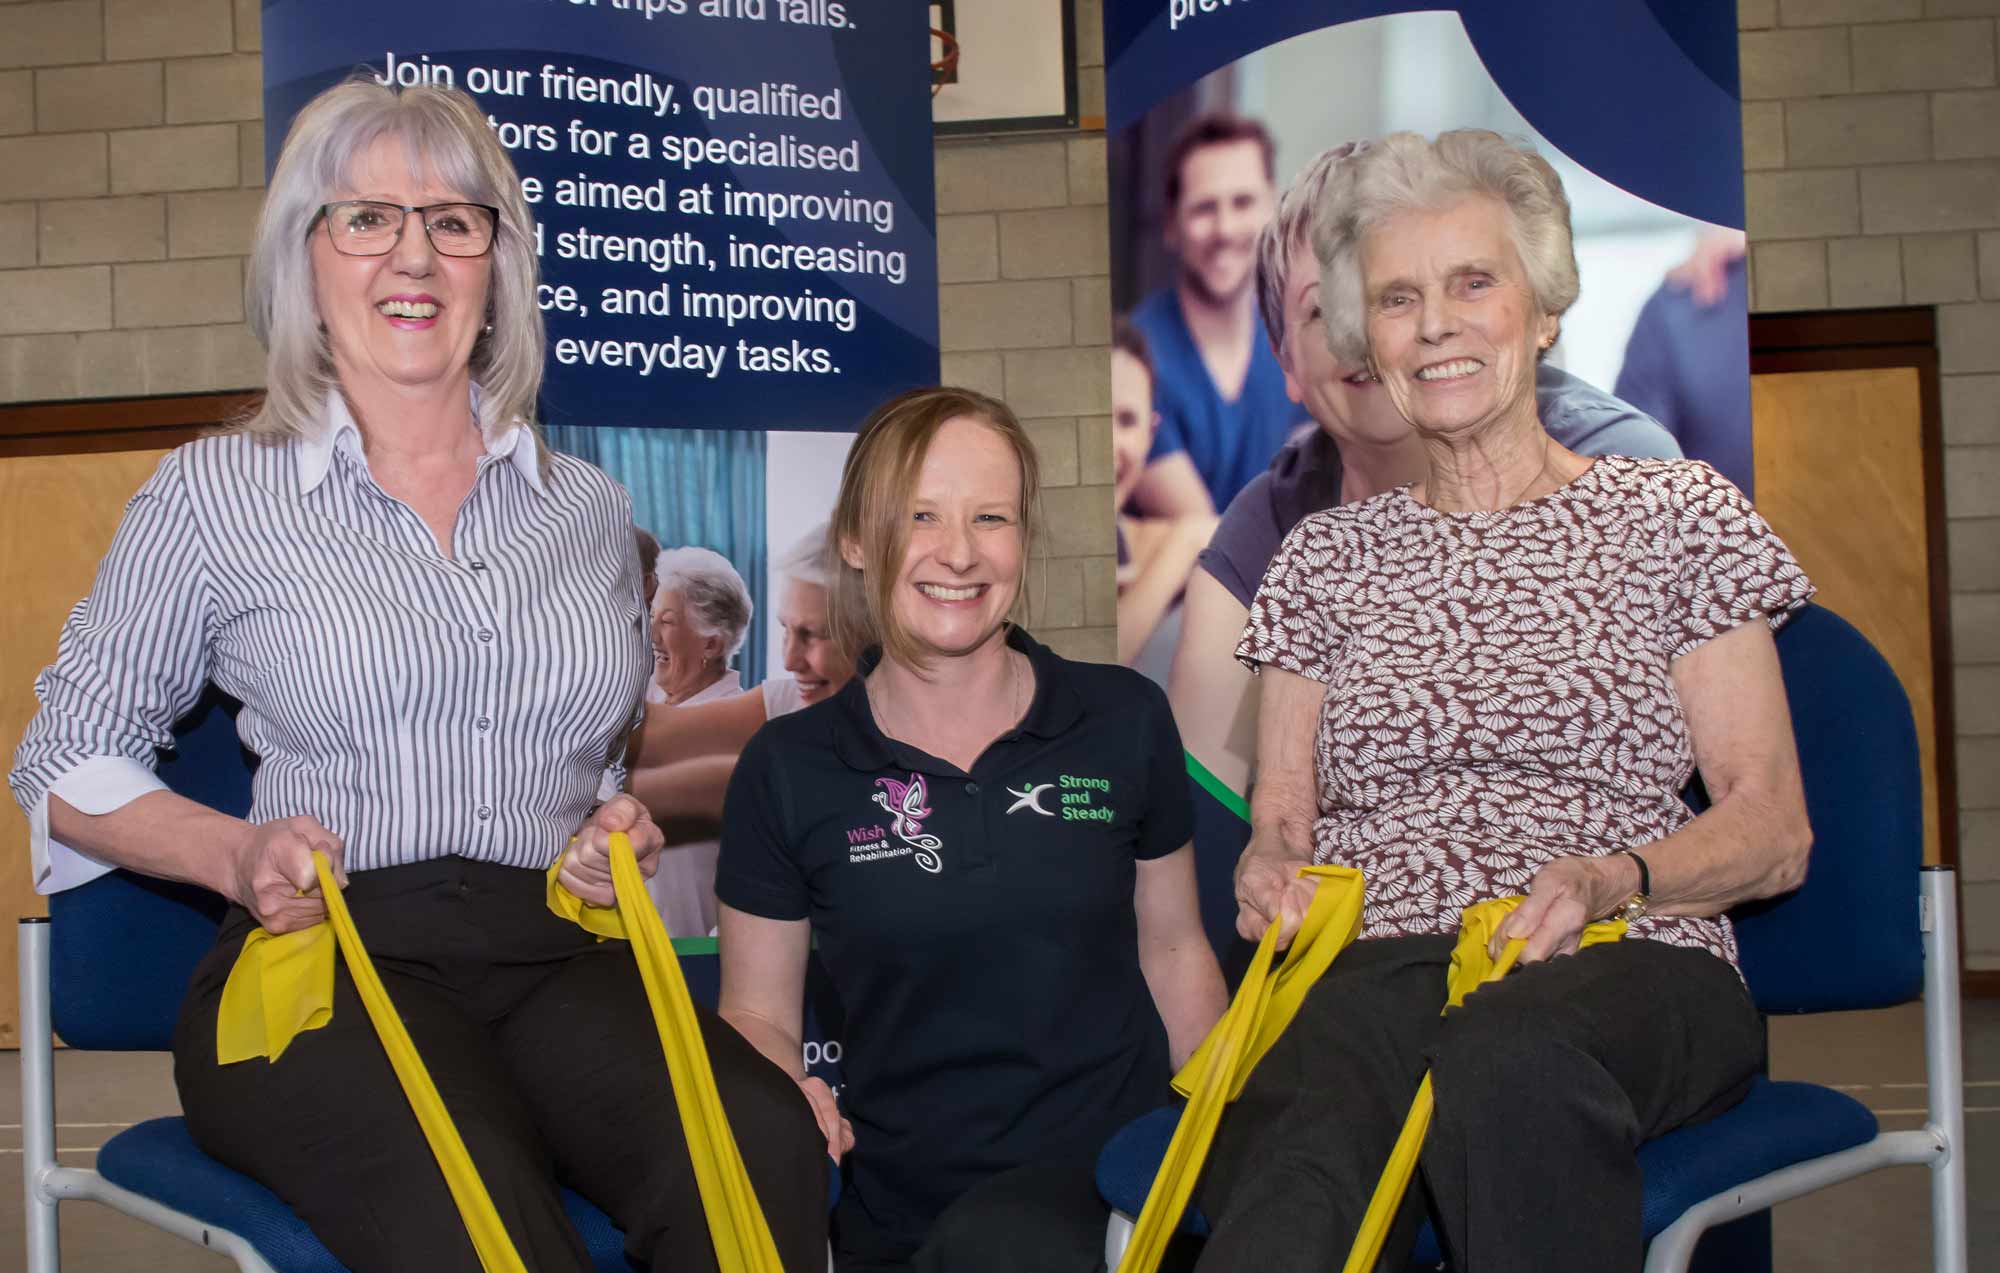 Cllr Caroline Dickinson with instructor Vicki Iwanuschak and group member Margaret Gibson at the launch of the Strong and Steady pilot in Harrogate earlier this year